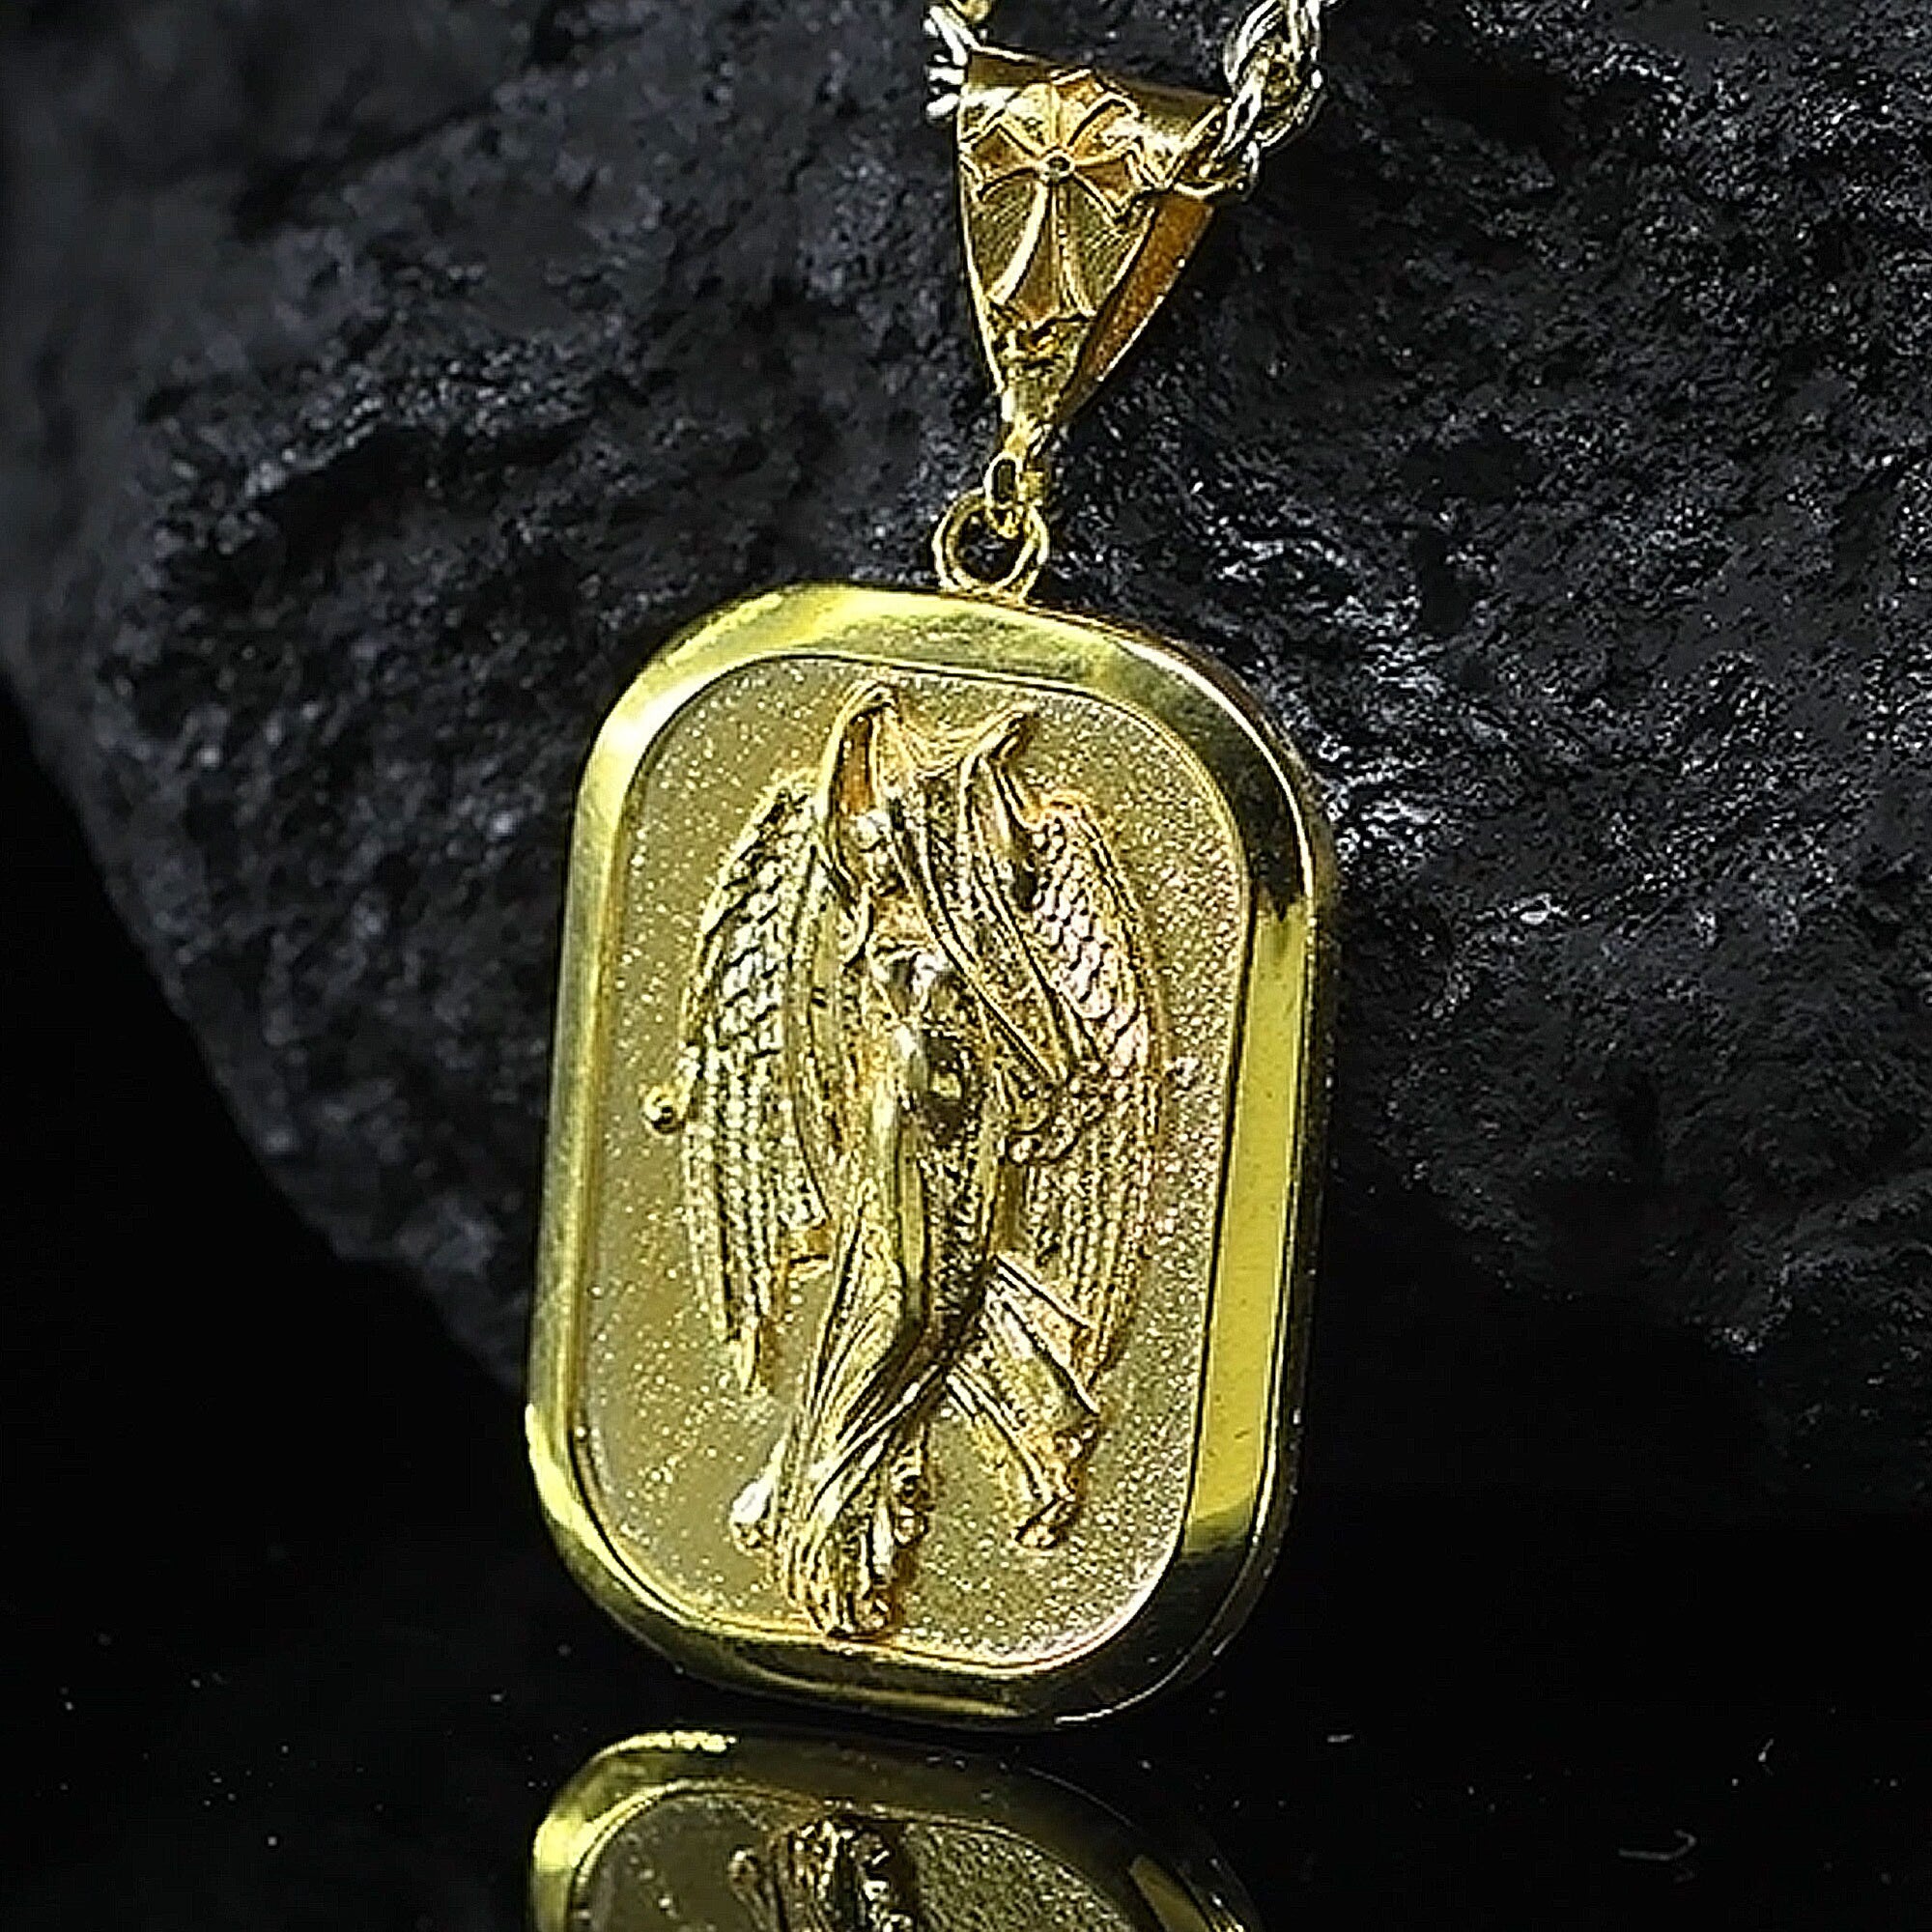 The Blessed Virgin Mary Necklace | SPARROW